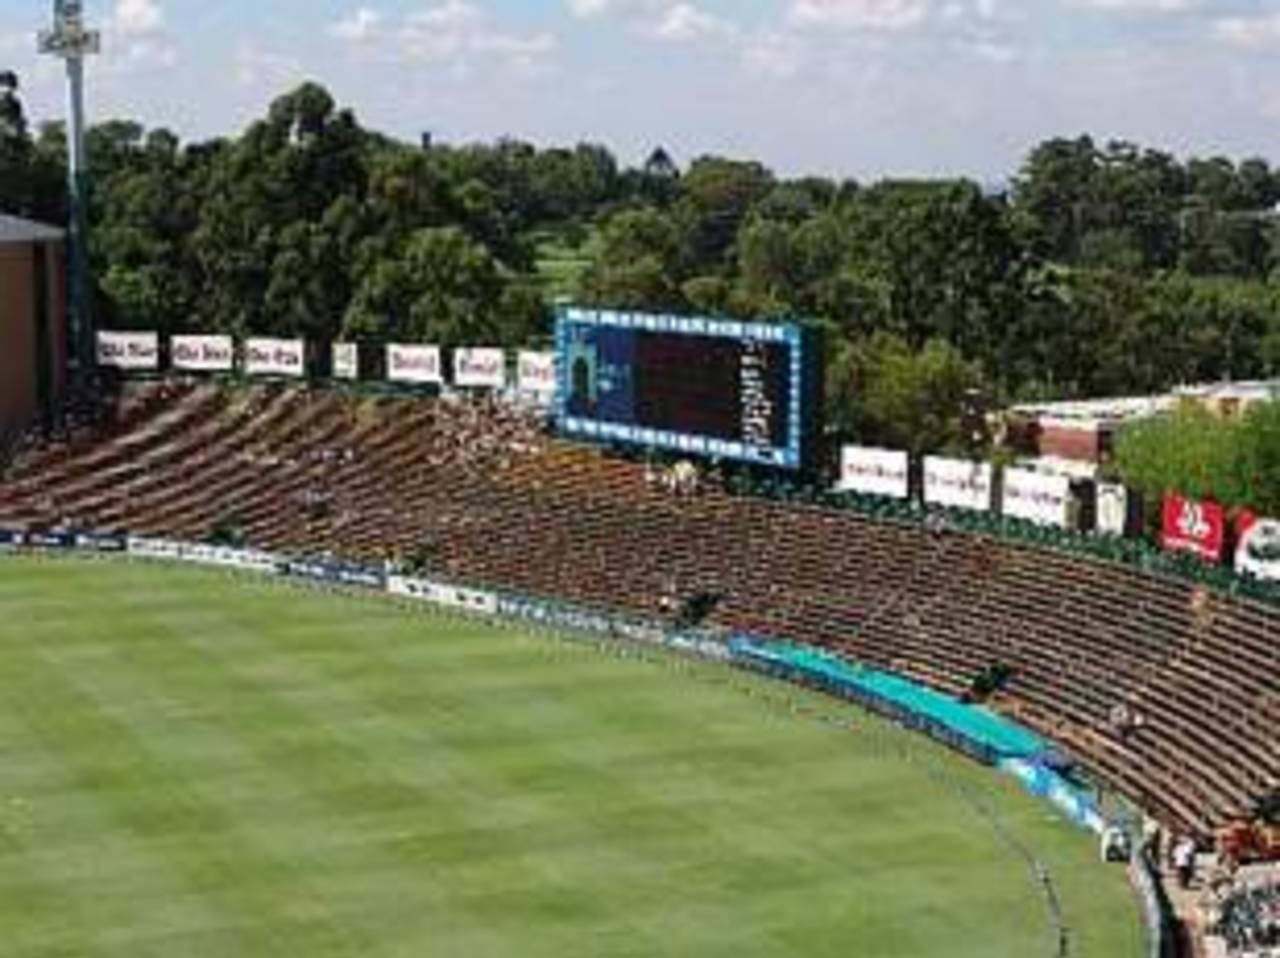 Empty stands: The Wanderers won't be hosting England later this year&nbsp;&nbsp;&bull;&nbsp;&nbsp;Keith Lane/ESPNcricinfo Ltd